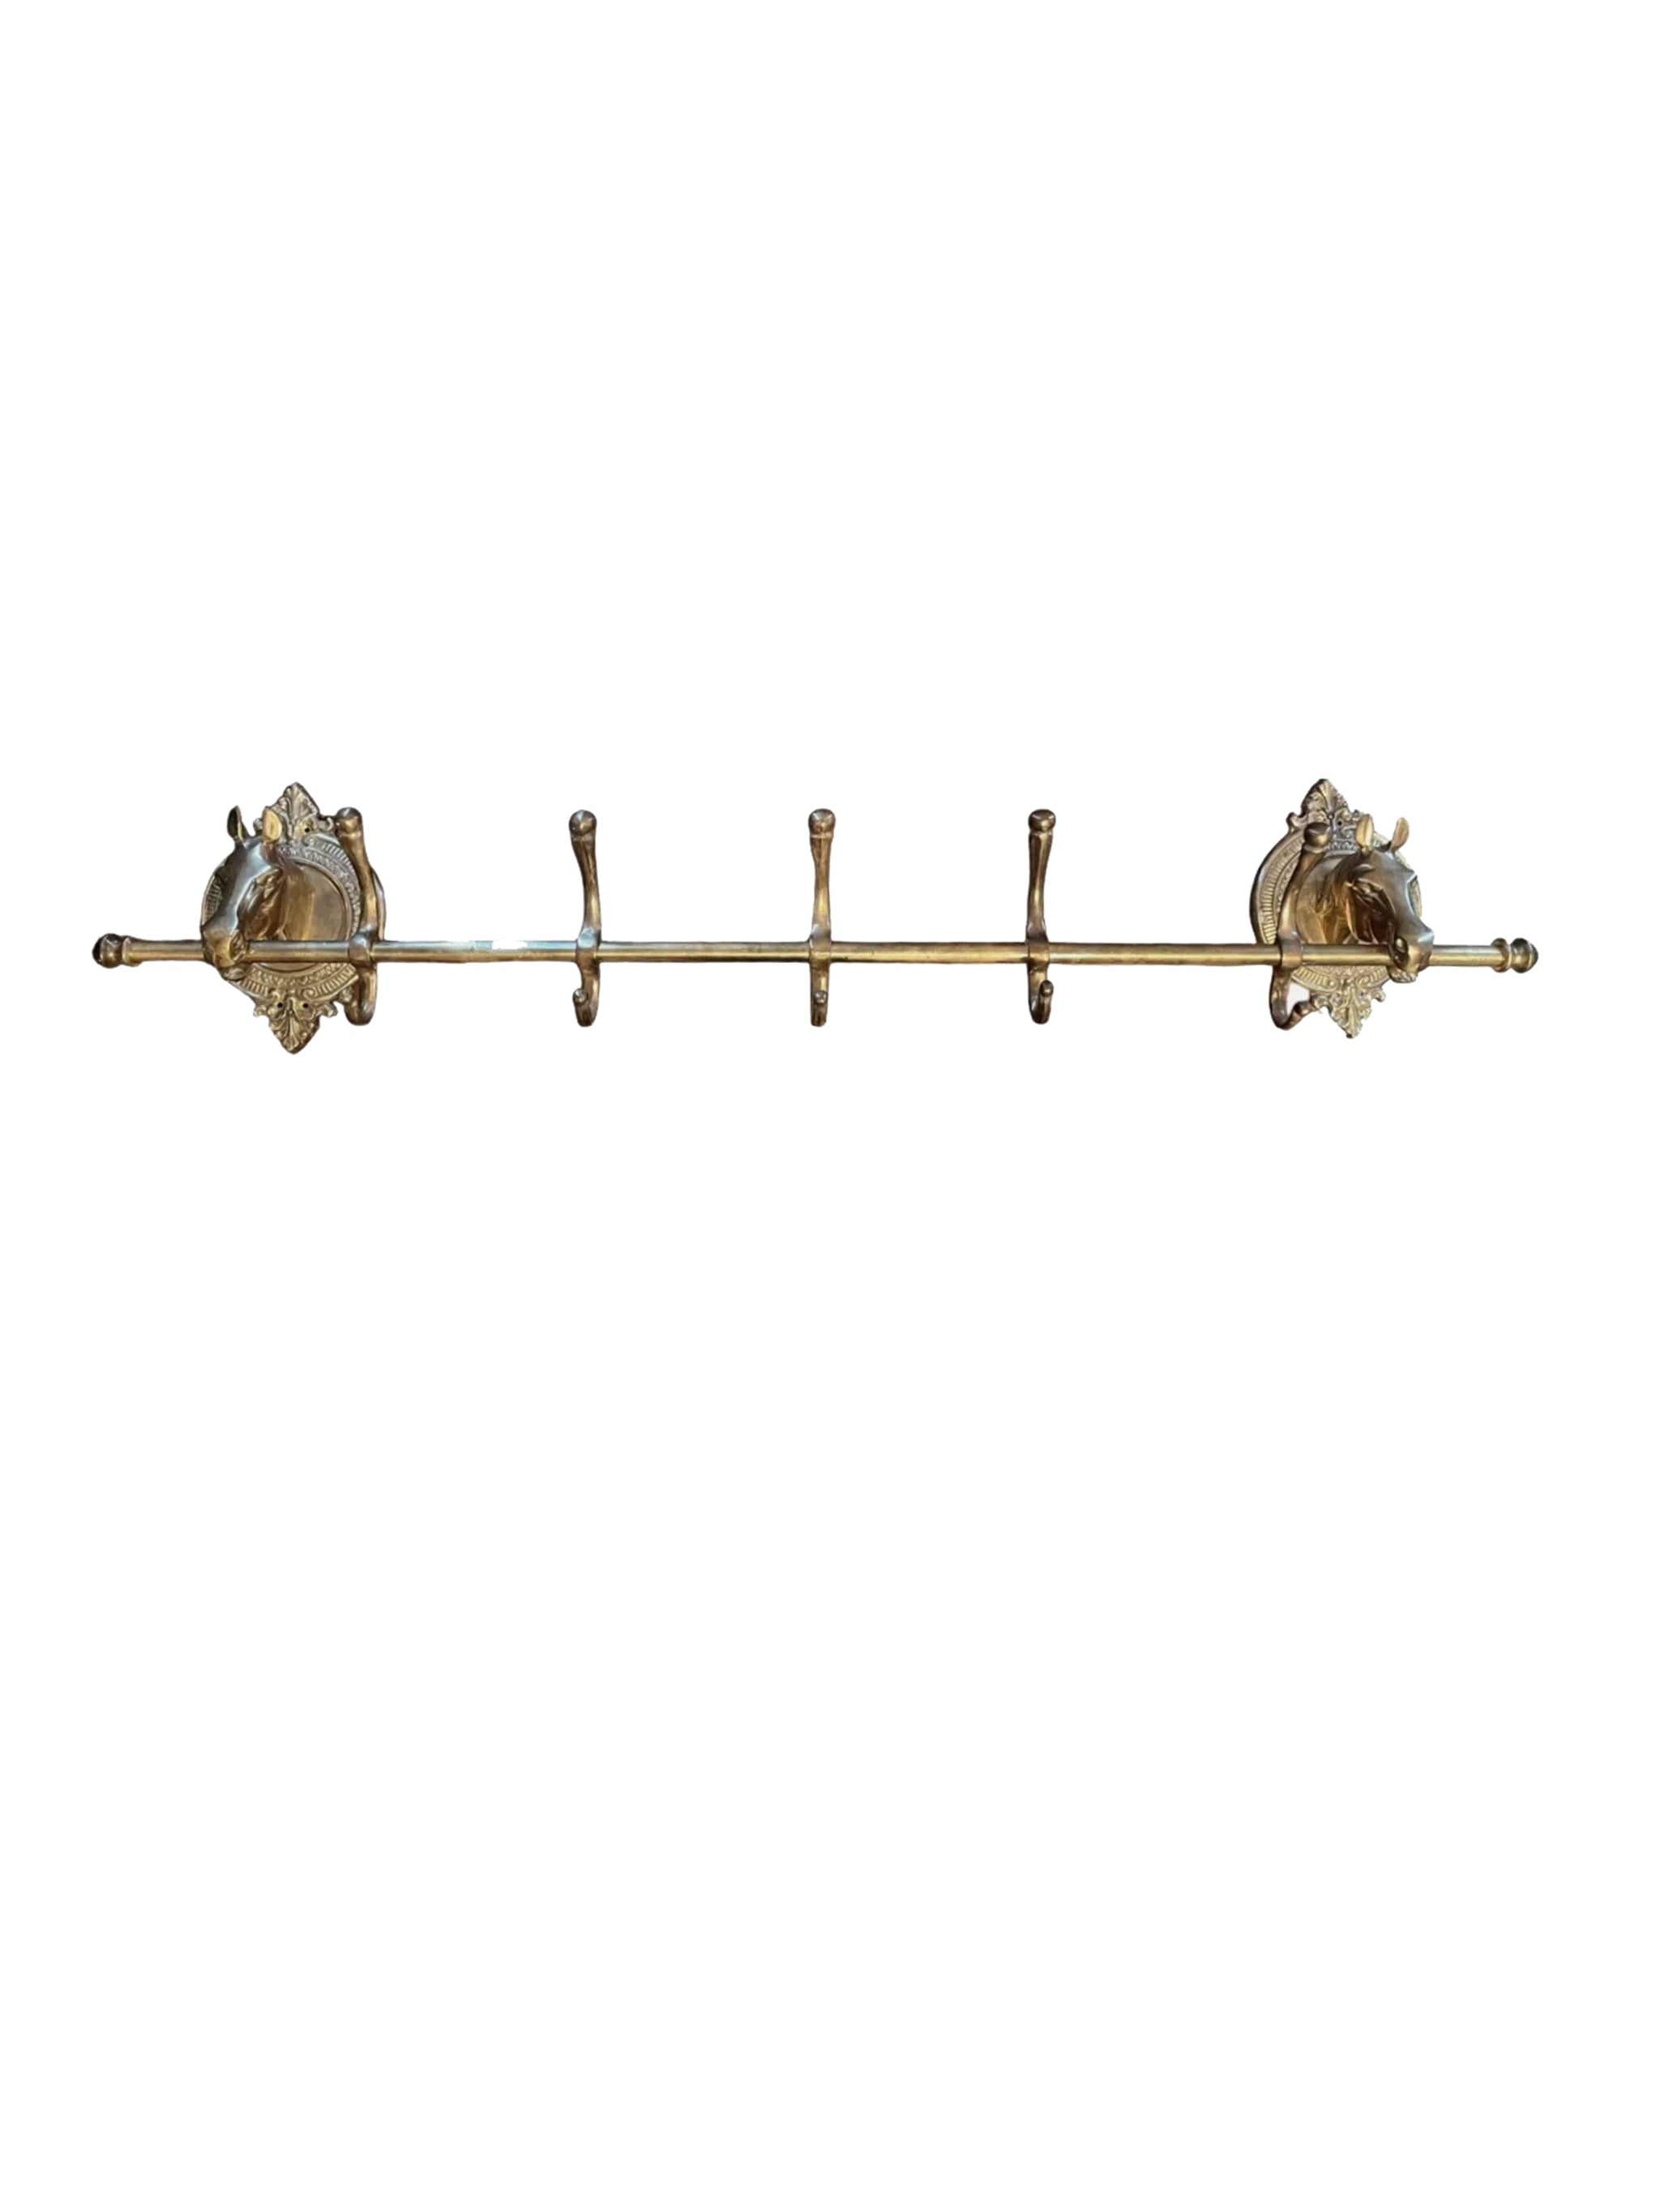 Shop the Vintage 1960s Brass Horse Head Mounted Coat Rack at